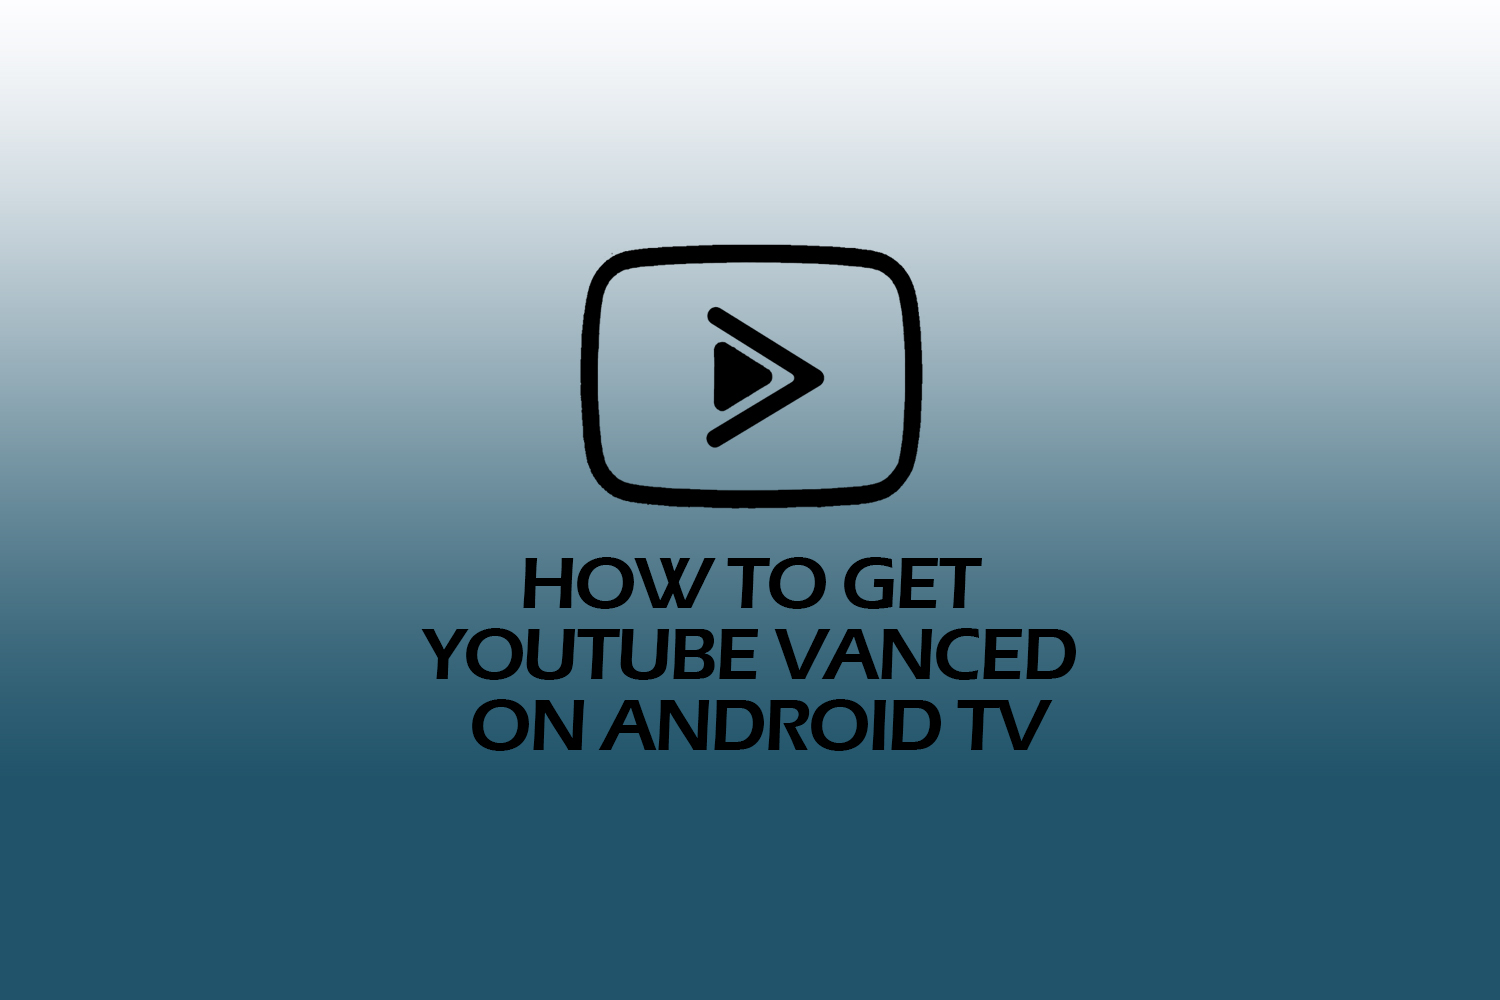 How to Get YouTube Vanced on Android TV